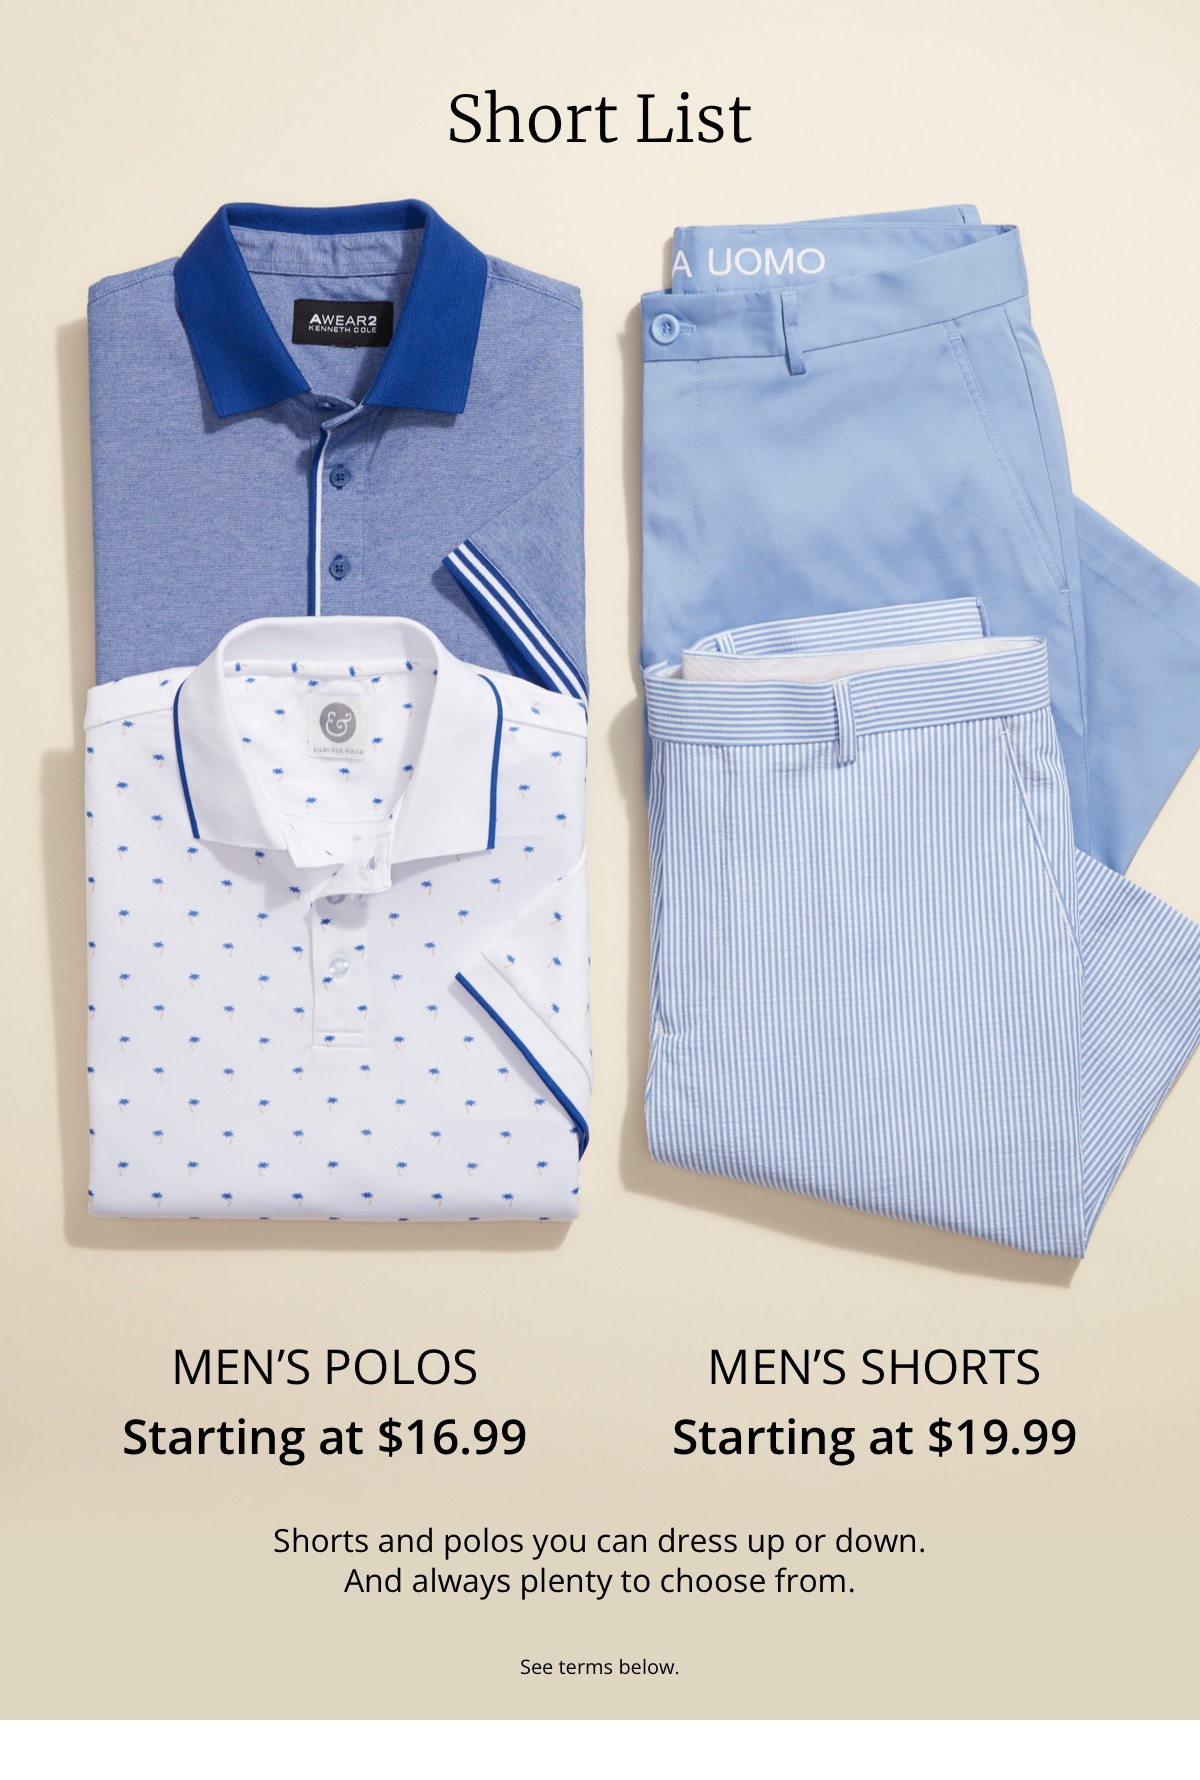 Short List. Men s Polos Starting at $16.99. Men s Shorts Starting at $19.99. Shorts and polos you can dress up or down. And always plenty to choose from. See terms below.